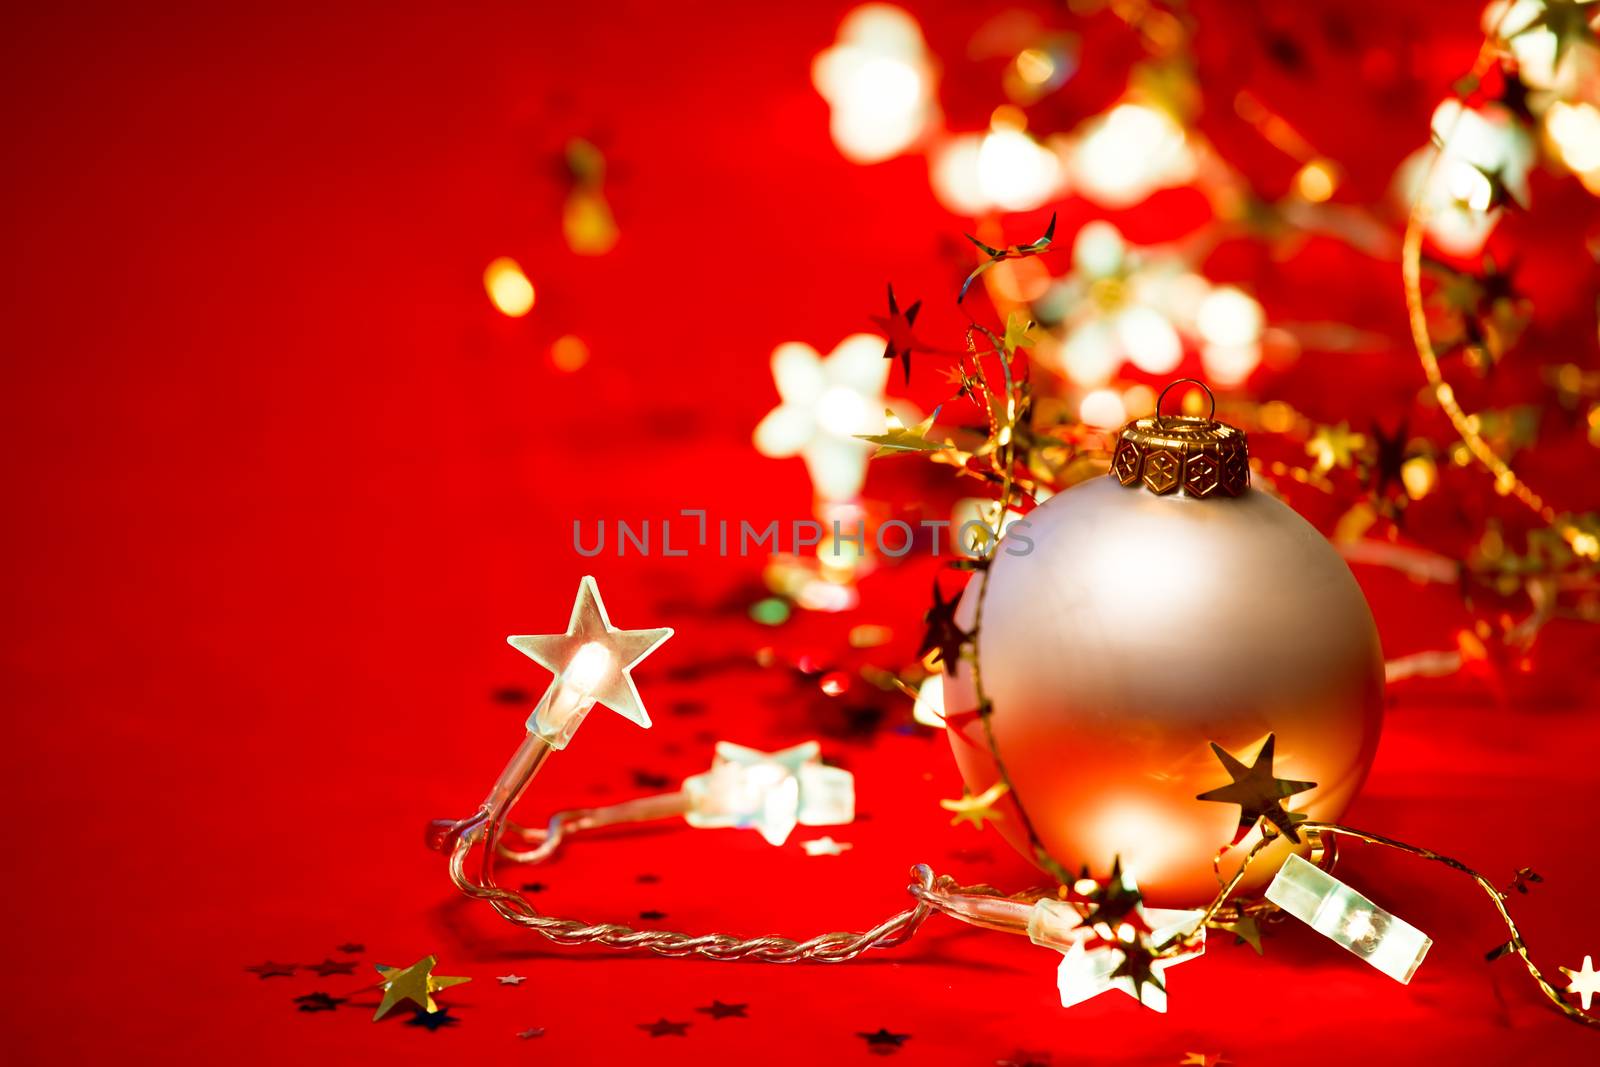 Christmas bauble with star-shaped lights on red background